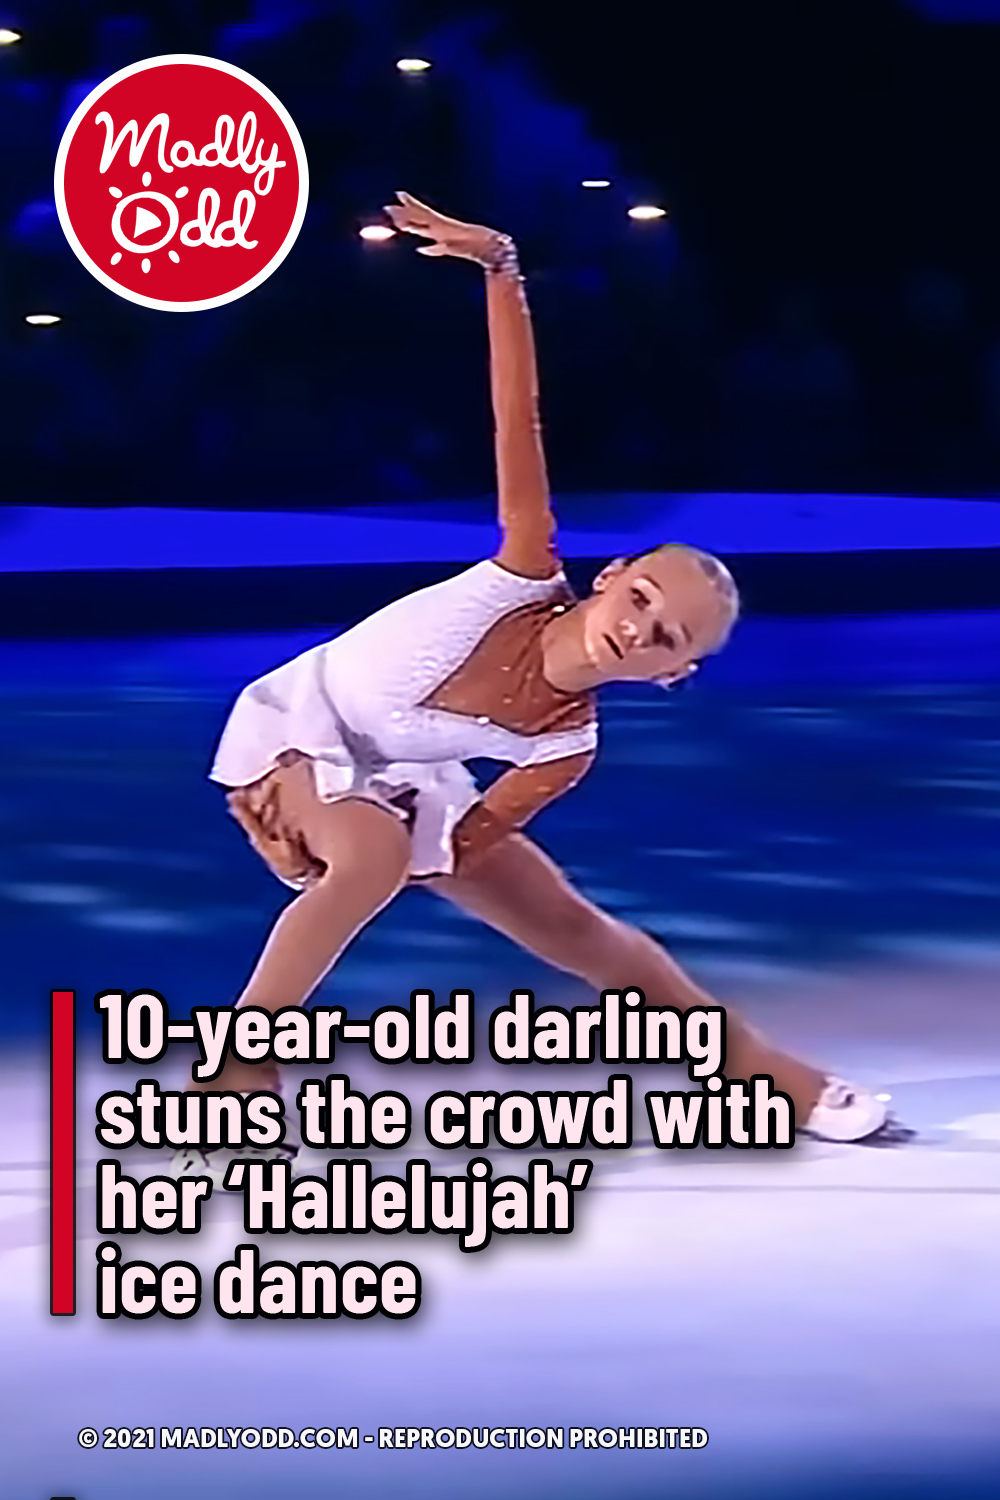 10-year-old darling stuns the crowd with her \'Hallelujah’ ice dance